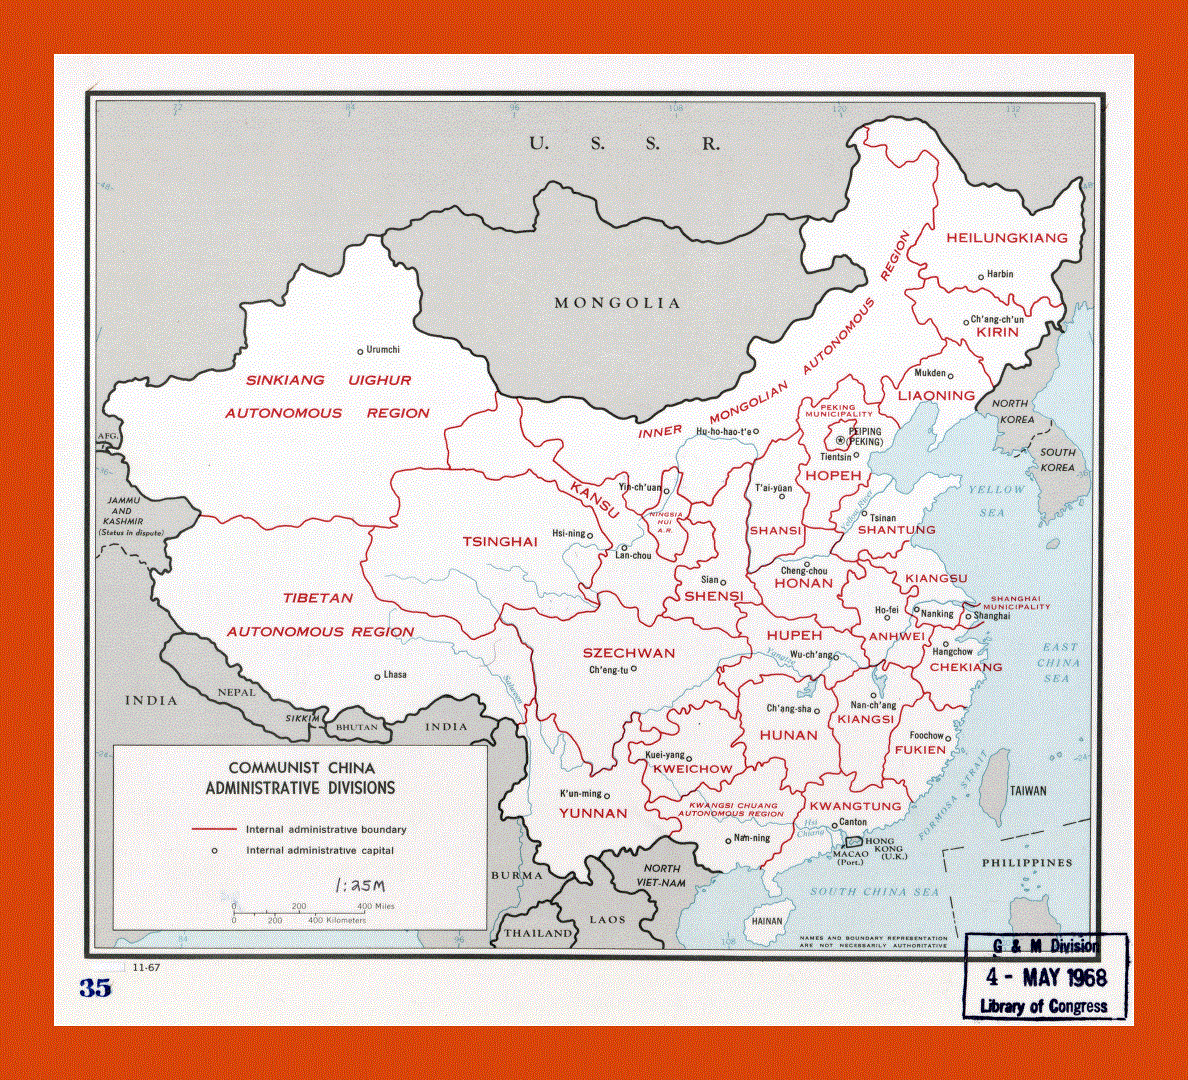 Administrative divisions map of Communist China - 1967